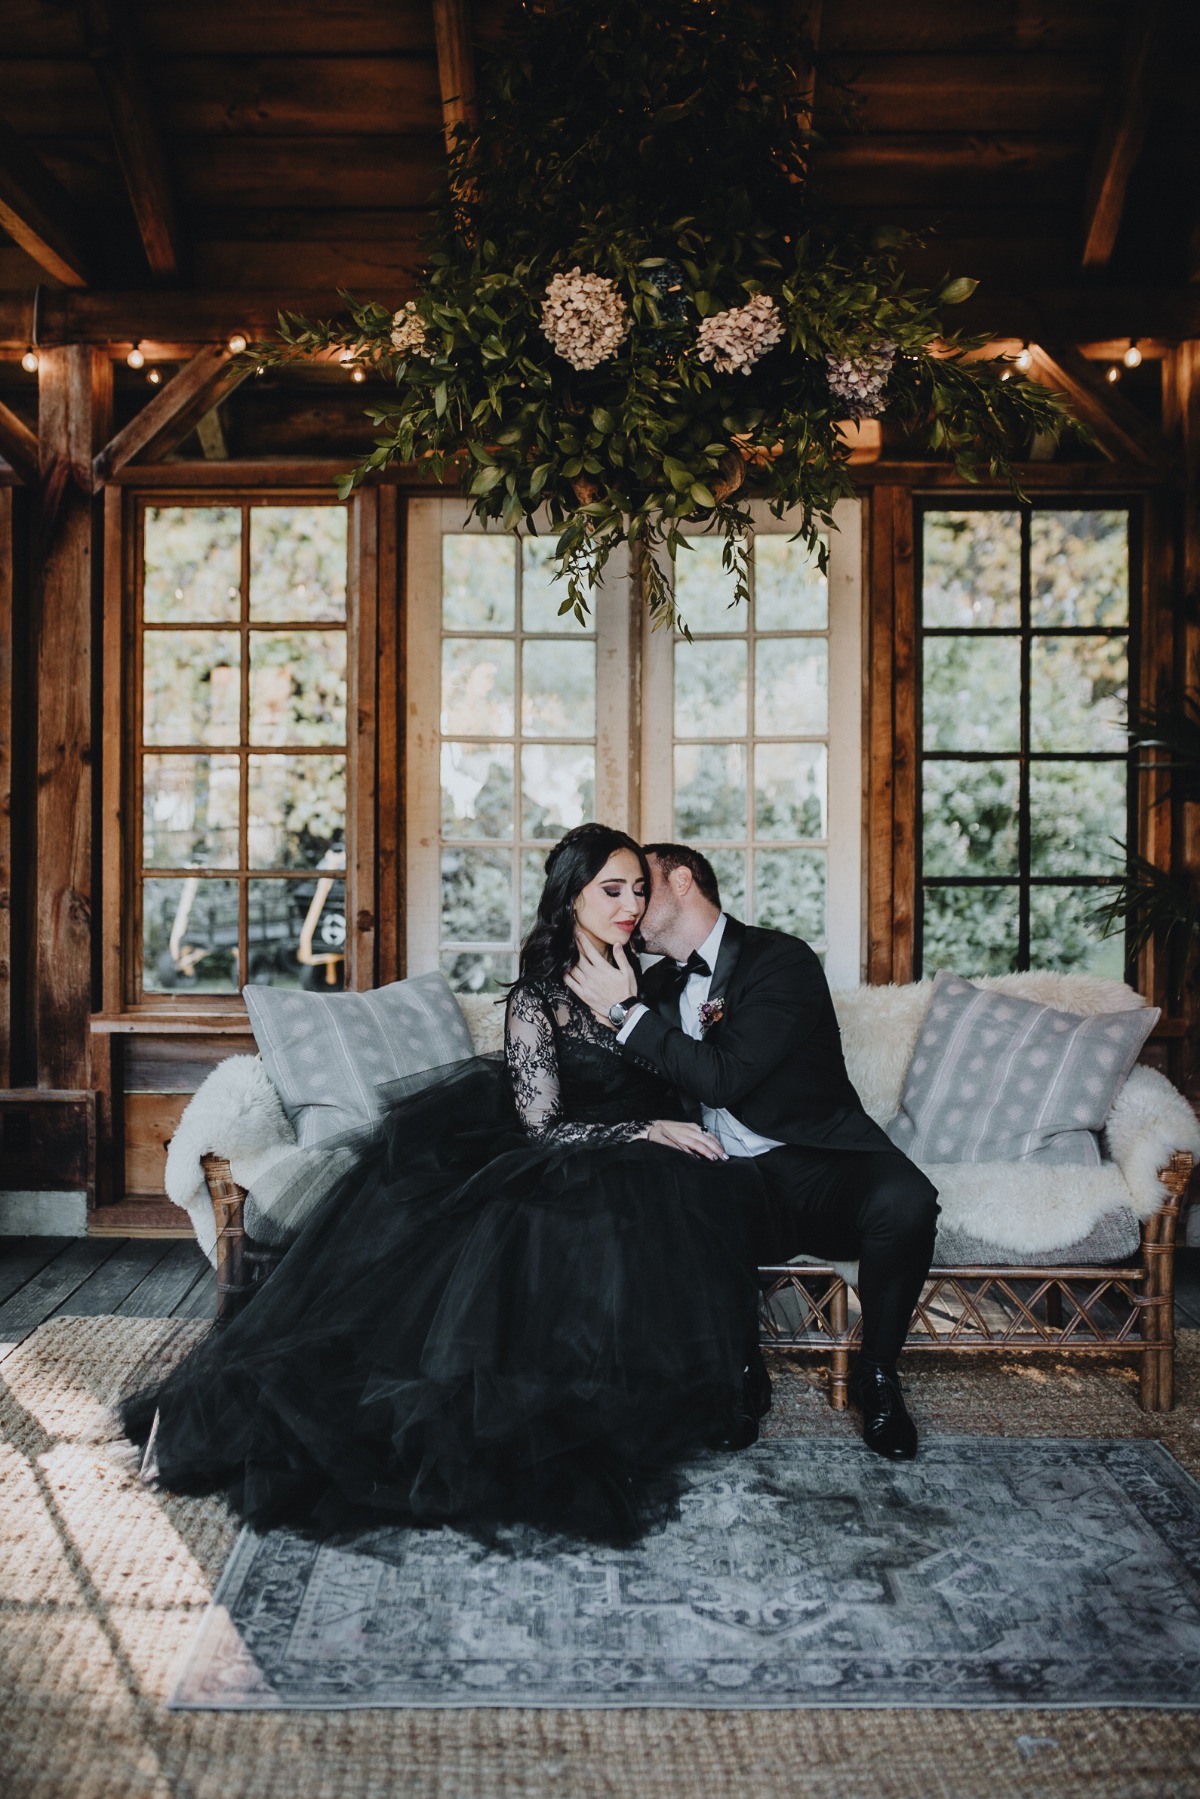 An enchanting & witchy fall wedding at Foxfire Mountain House